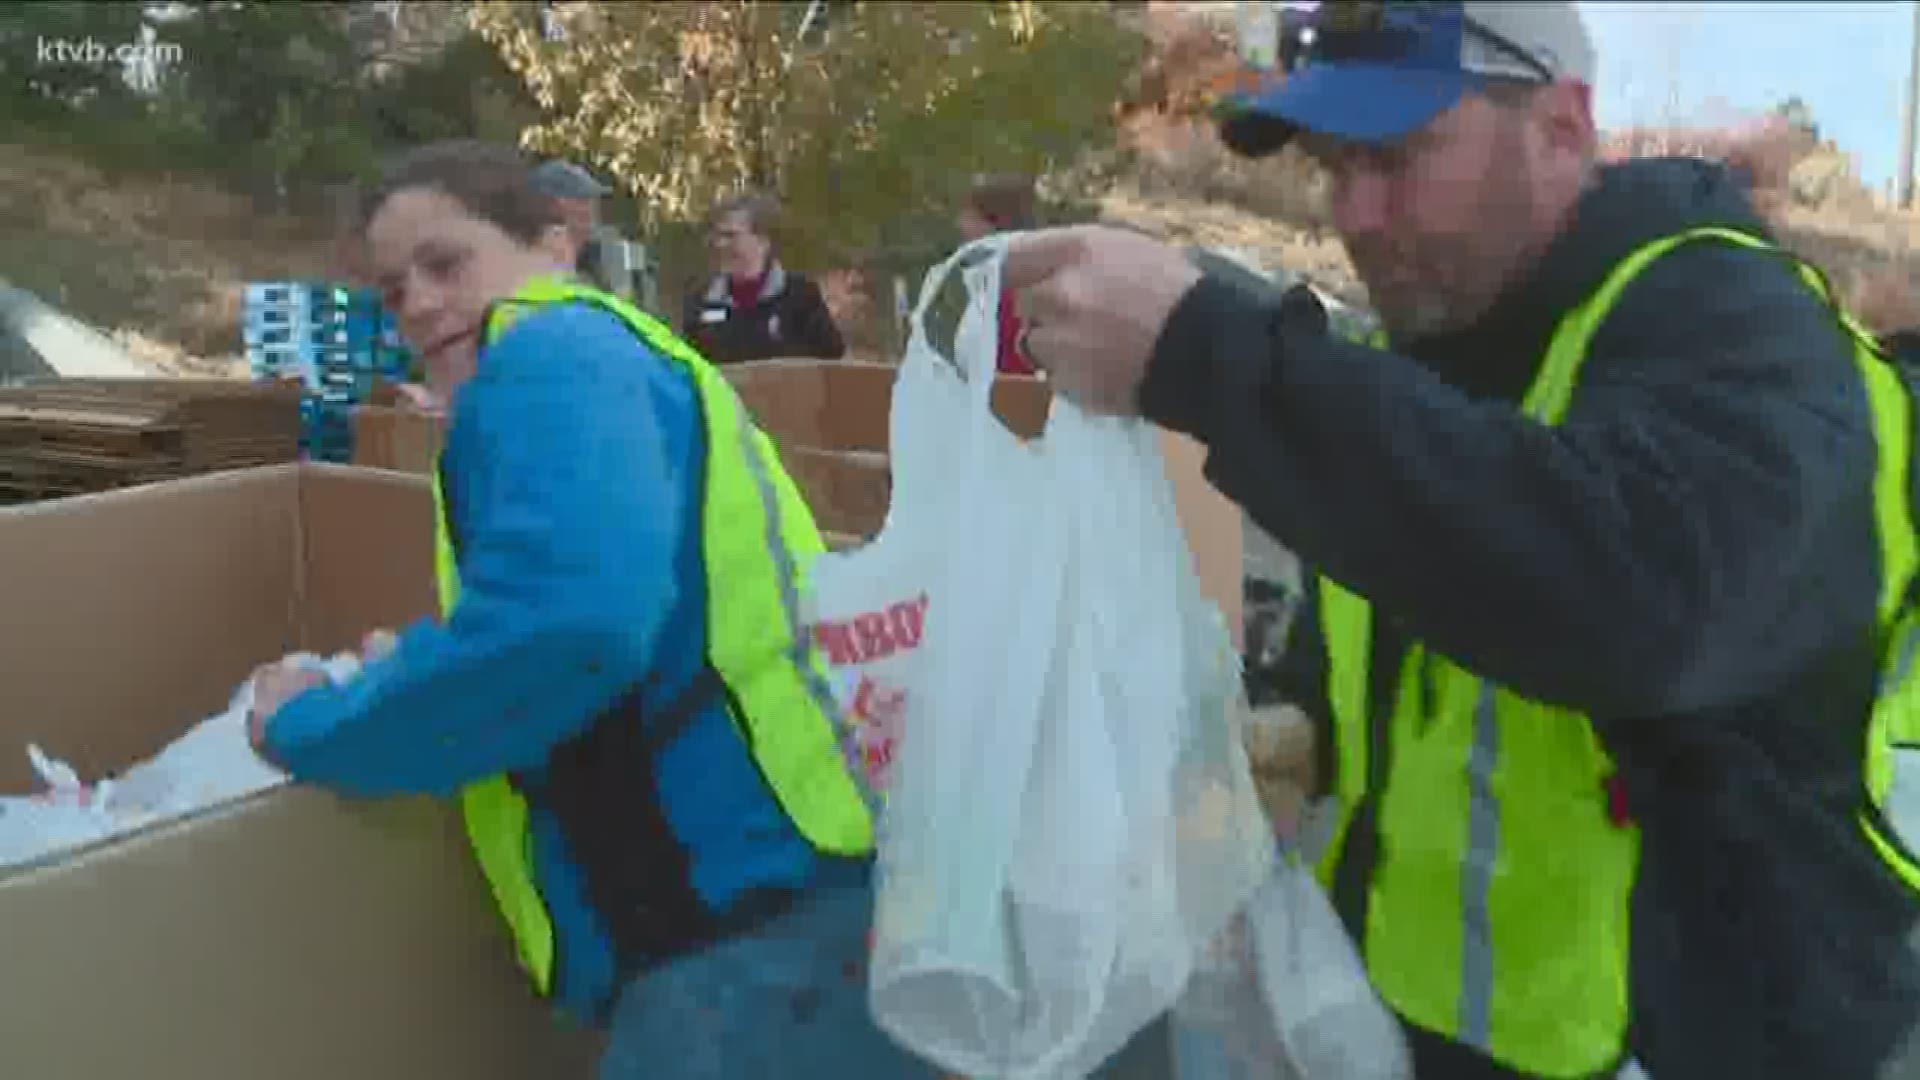 According to Idaho Foodbank officials, this food drive is one of their single biggest events of the year.